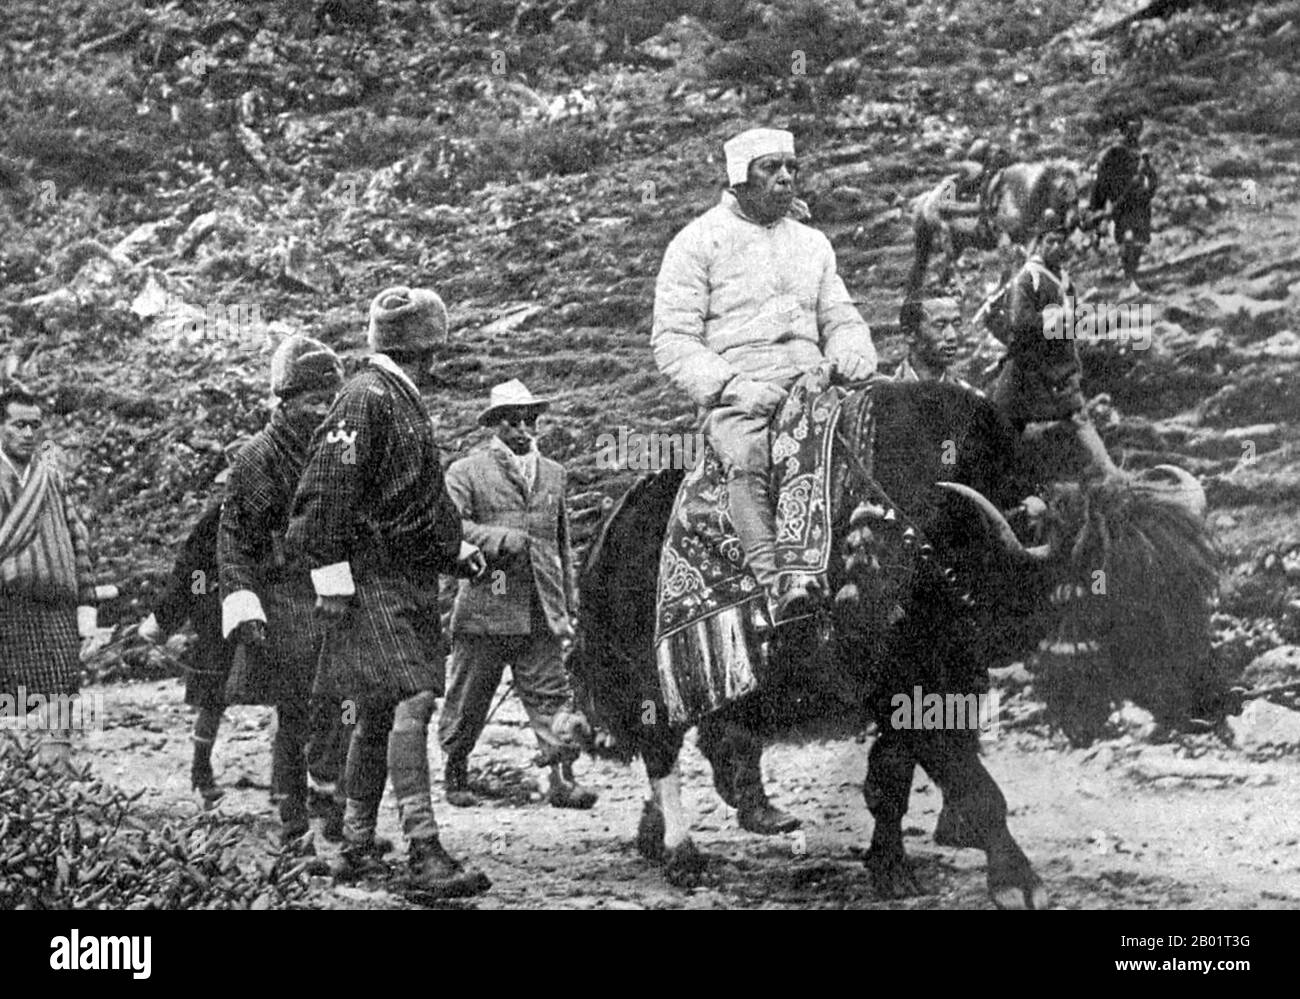 Bhutan/India: Jawaharlal Nehru (14 November 1889 - 27 May 1964), first Prime Minister of India, riding a yak in Bhutan, 1956.  Jawaharlal Nehru was an Indian statesman who was the first (and to date longest-serving) prime minister of India, from 1947 until 1964. One of the leading figures in the Indian independence movement, Nehru was elected by the Congress Party to assume office as independent India's first Prime Minister, and re-elected when the Congress Party won India's first general election in 1952. Stock Photo